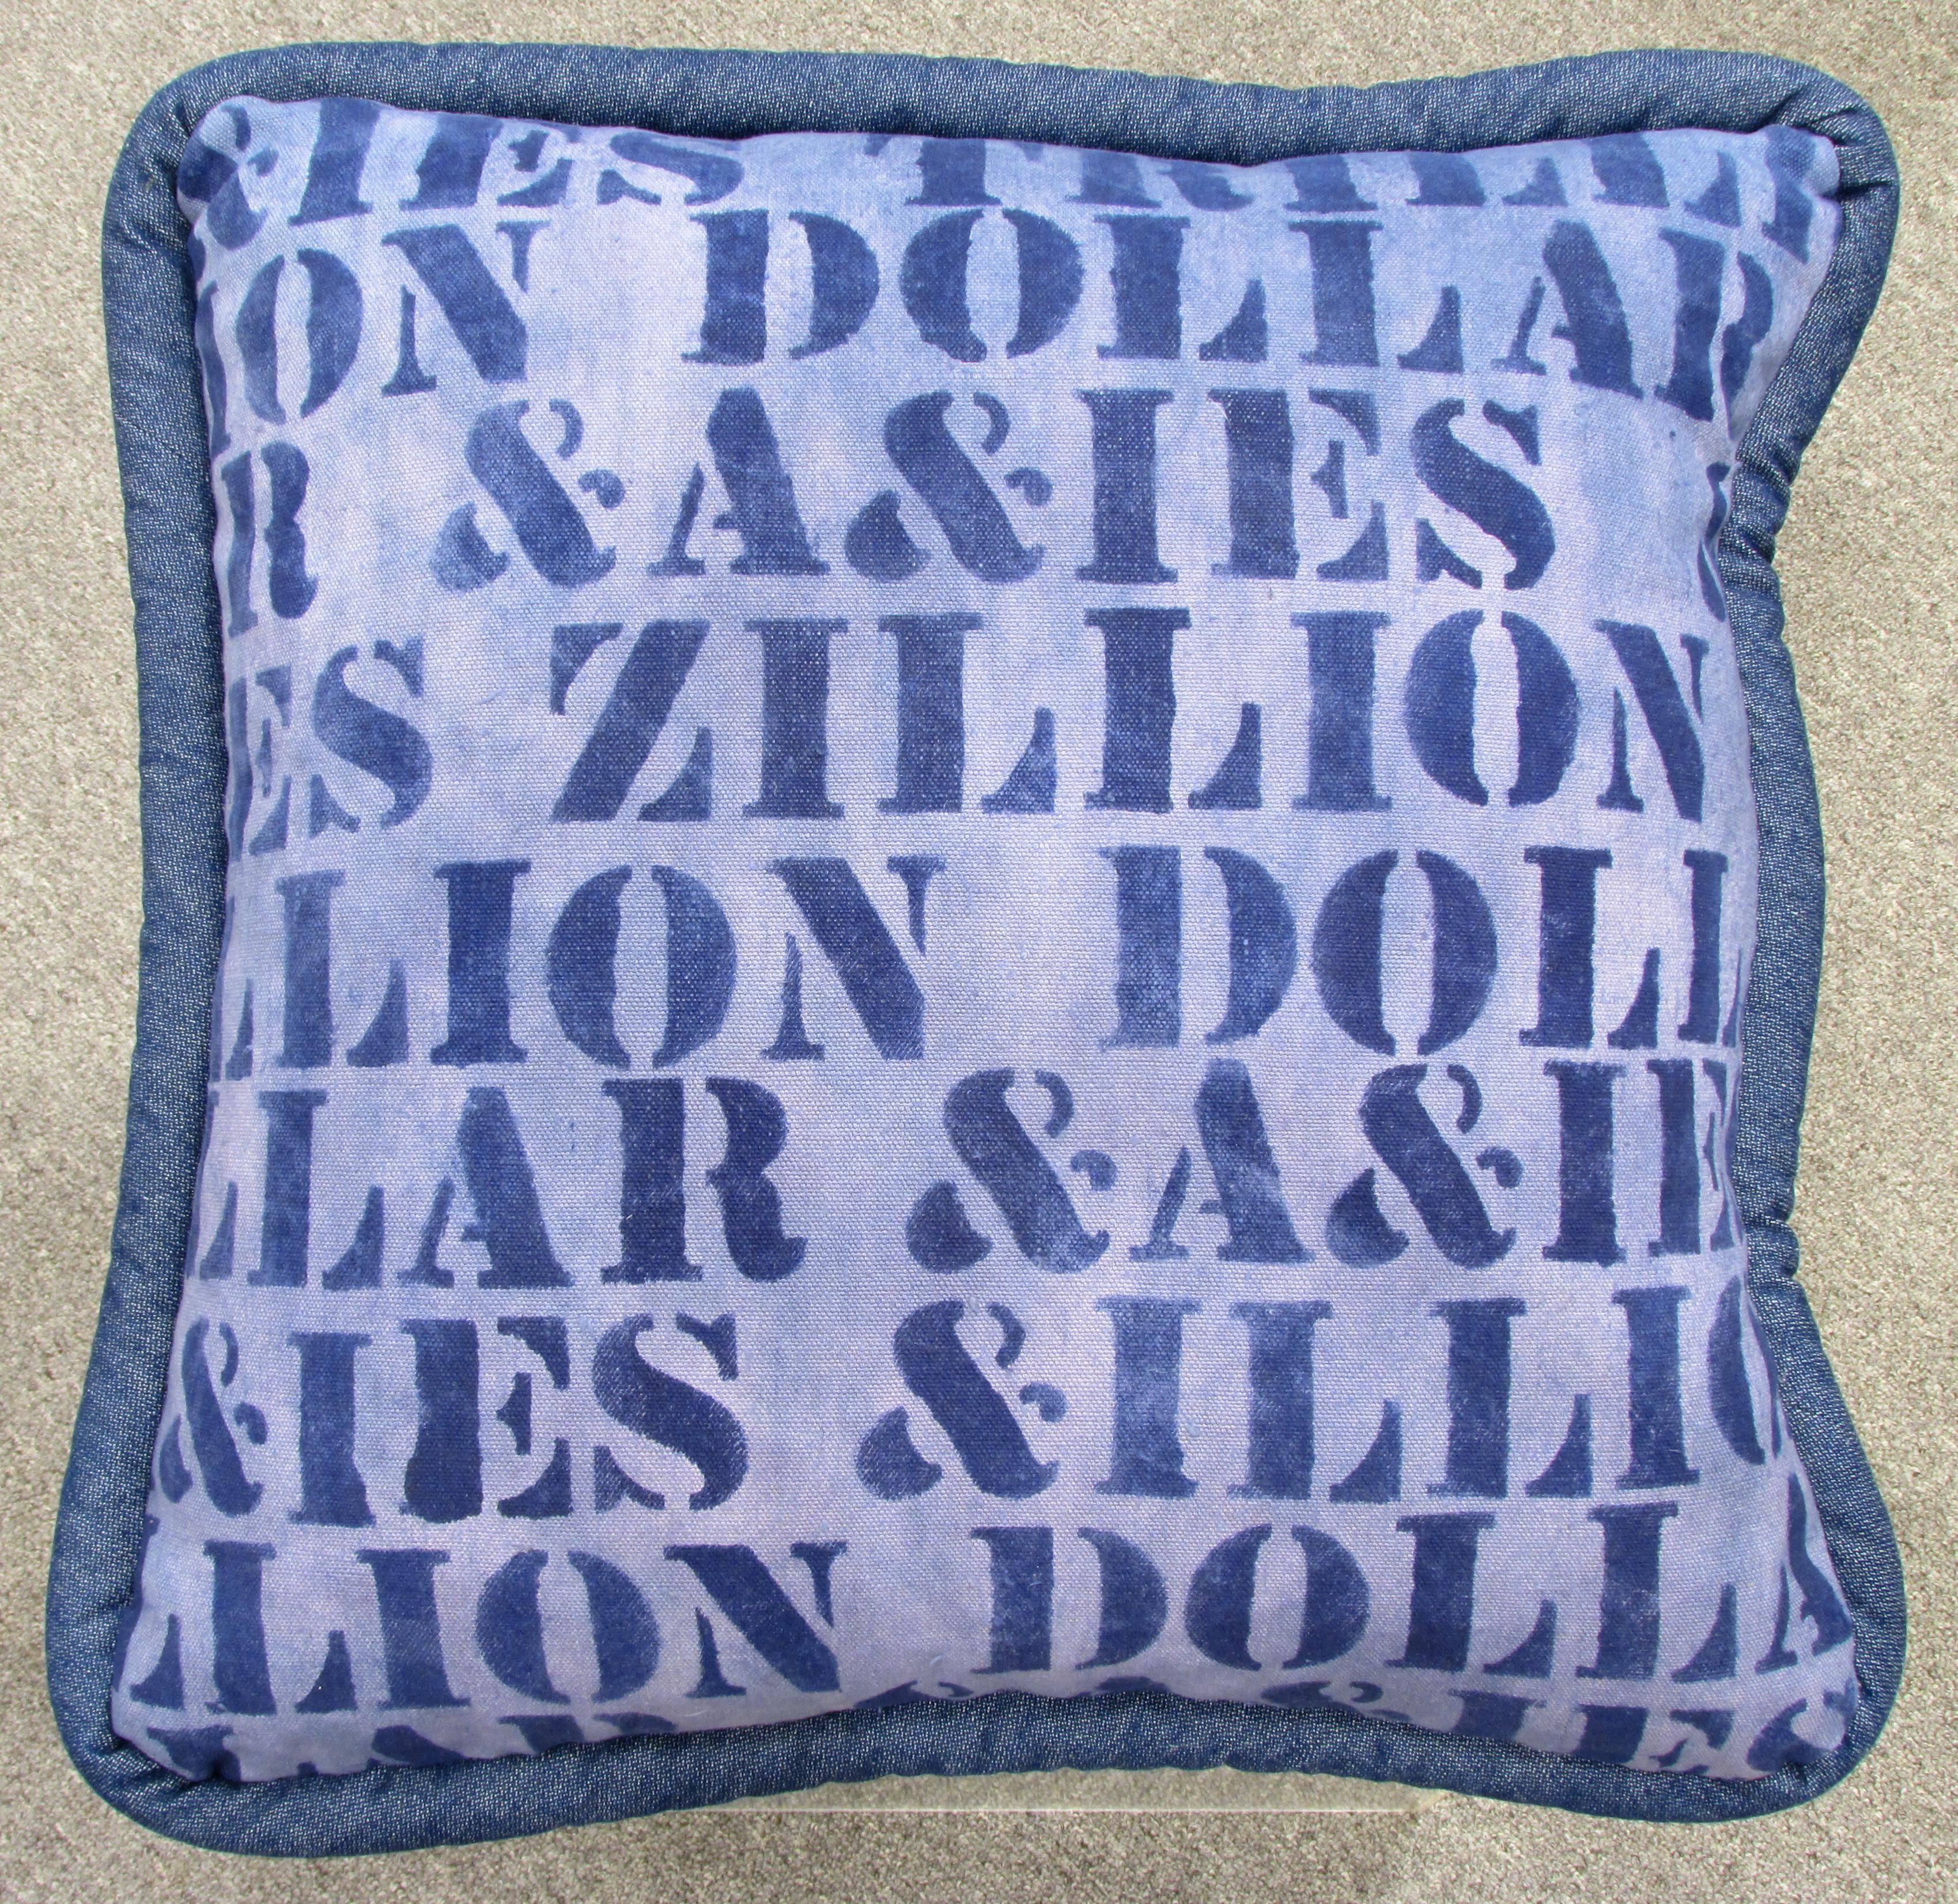 Hand-painted and stenciled pillow finished on both sides with down filled insert "MILLION DOLLAR &A&IES BILLION DOLLAR &A&IES TRILLION DOLLAR &A&IES ZILLION DOLLAR &A&IES" three pillows available.